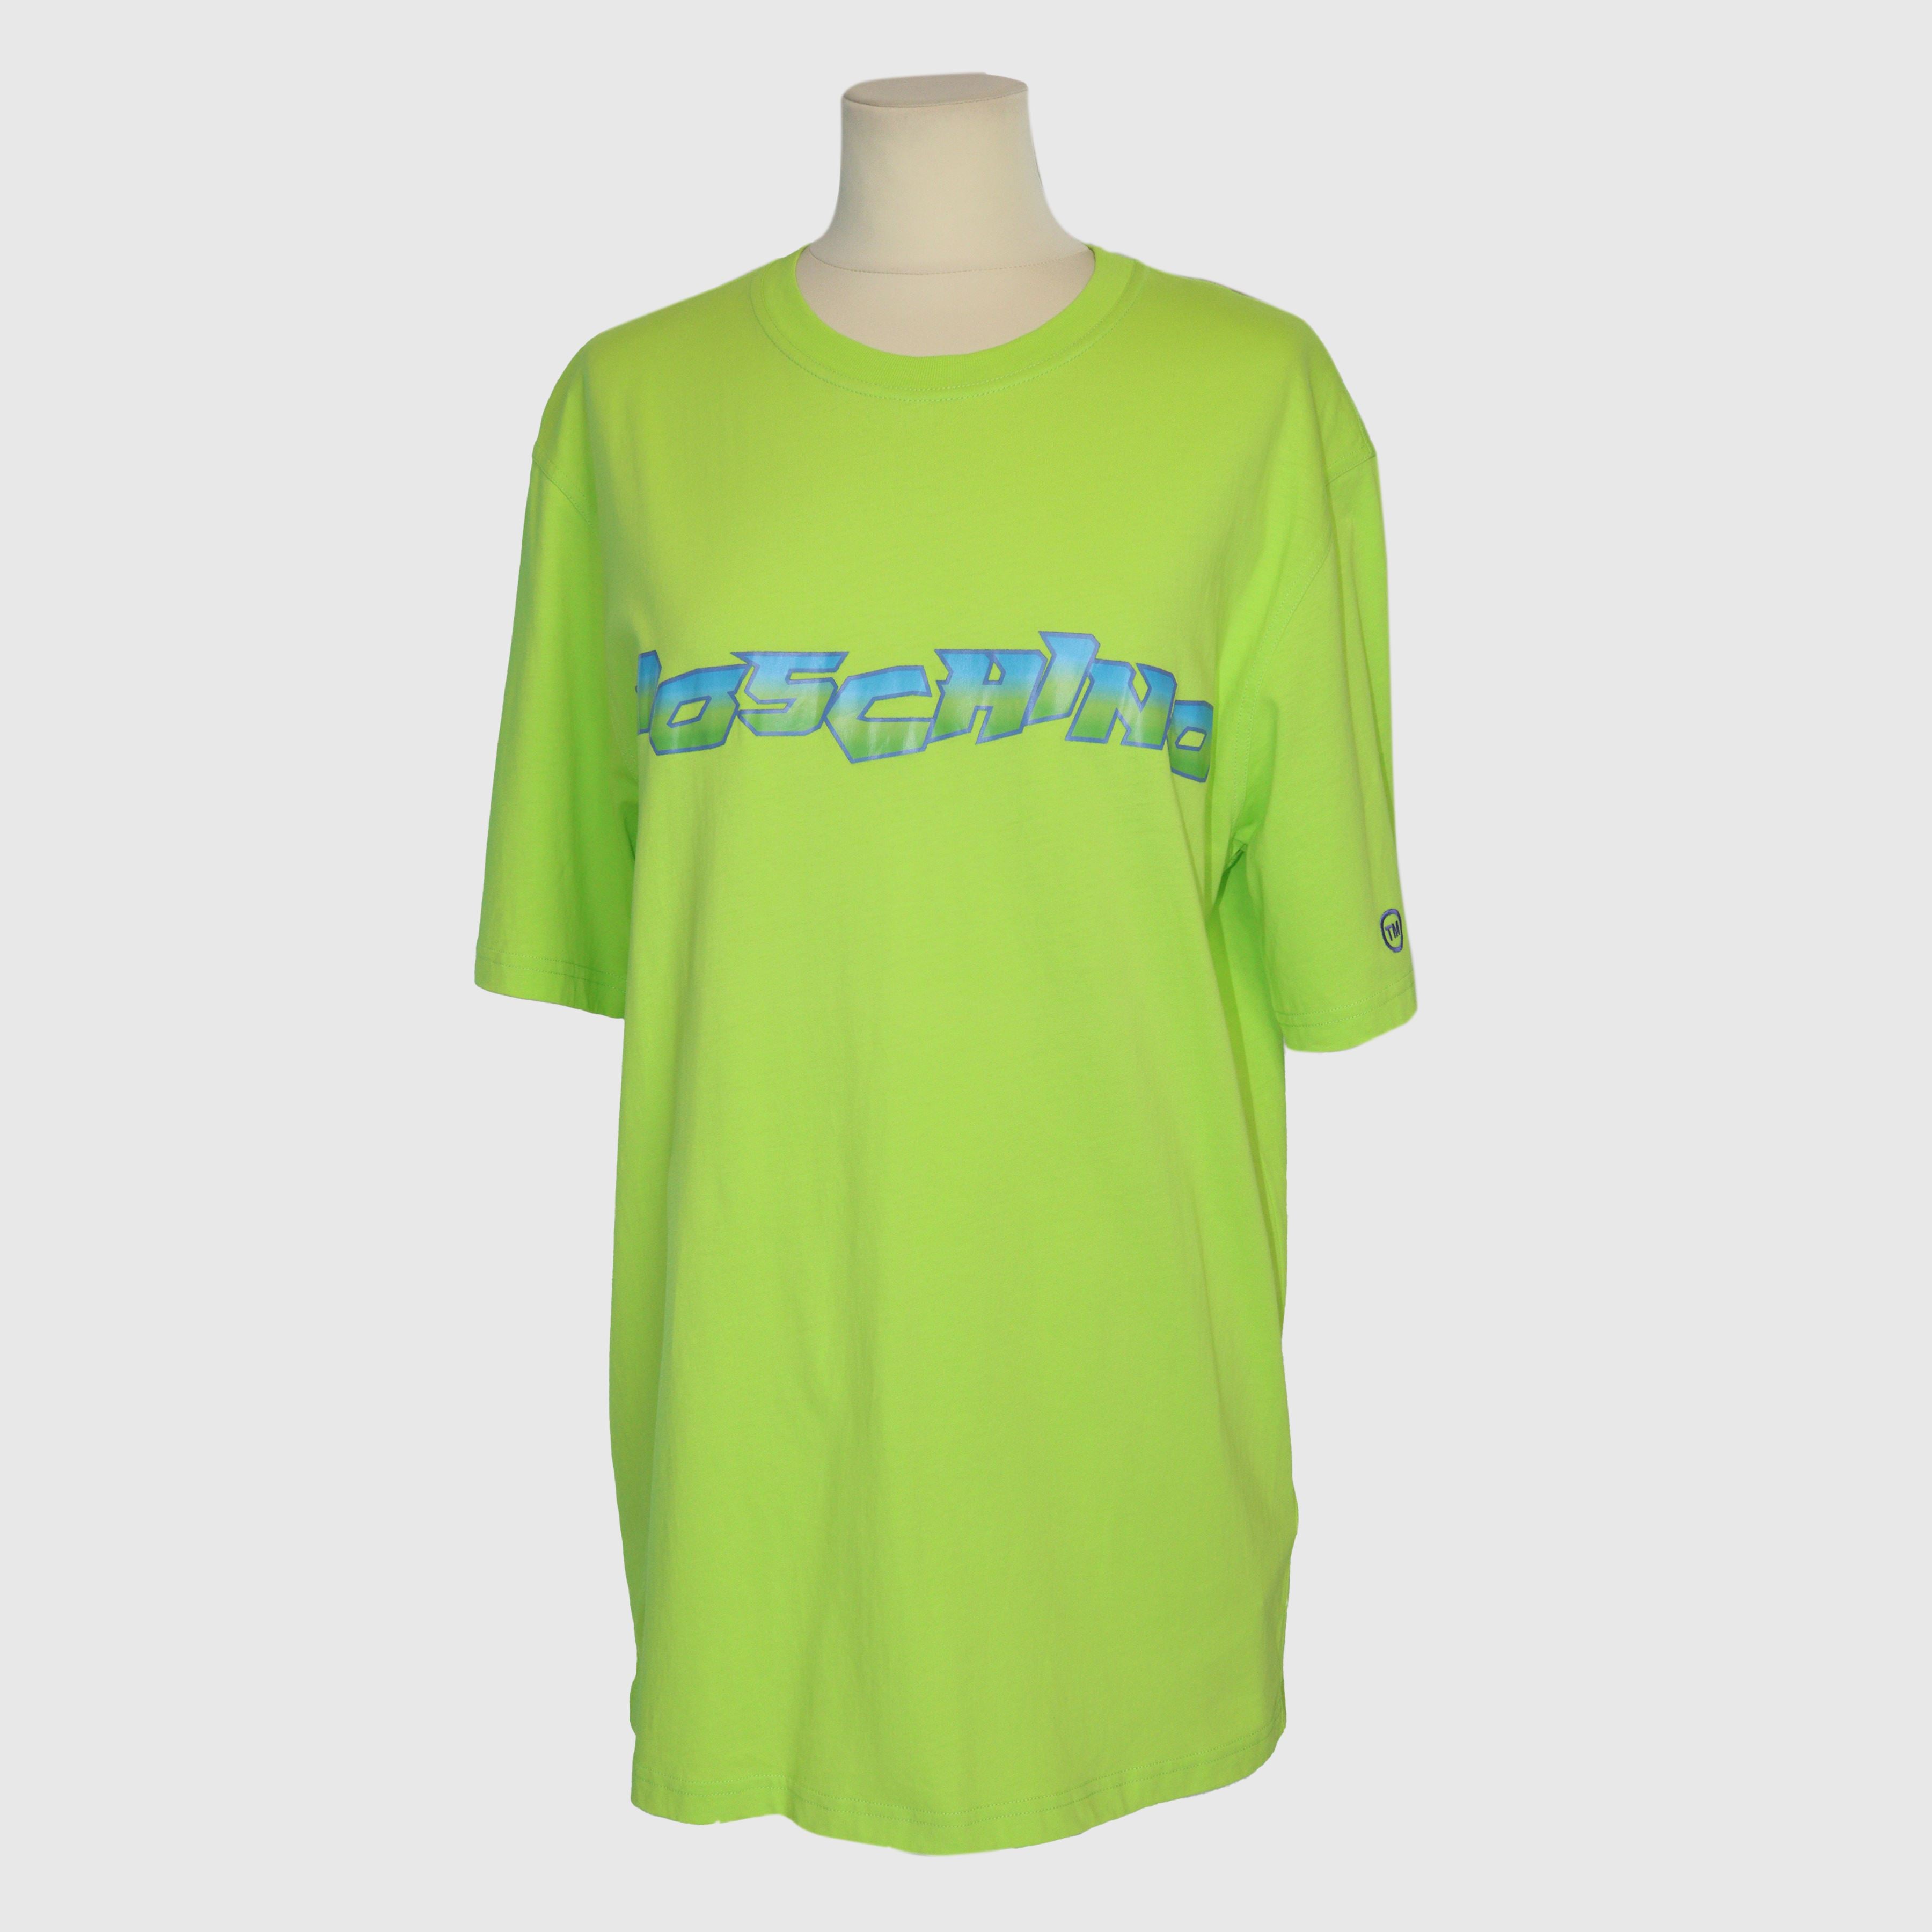 Lime Green Printed Crew T Shirt Clothing Moschino 